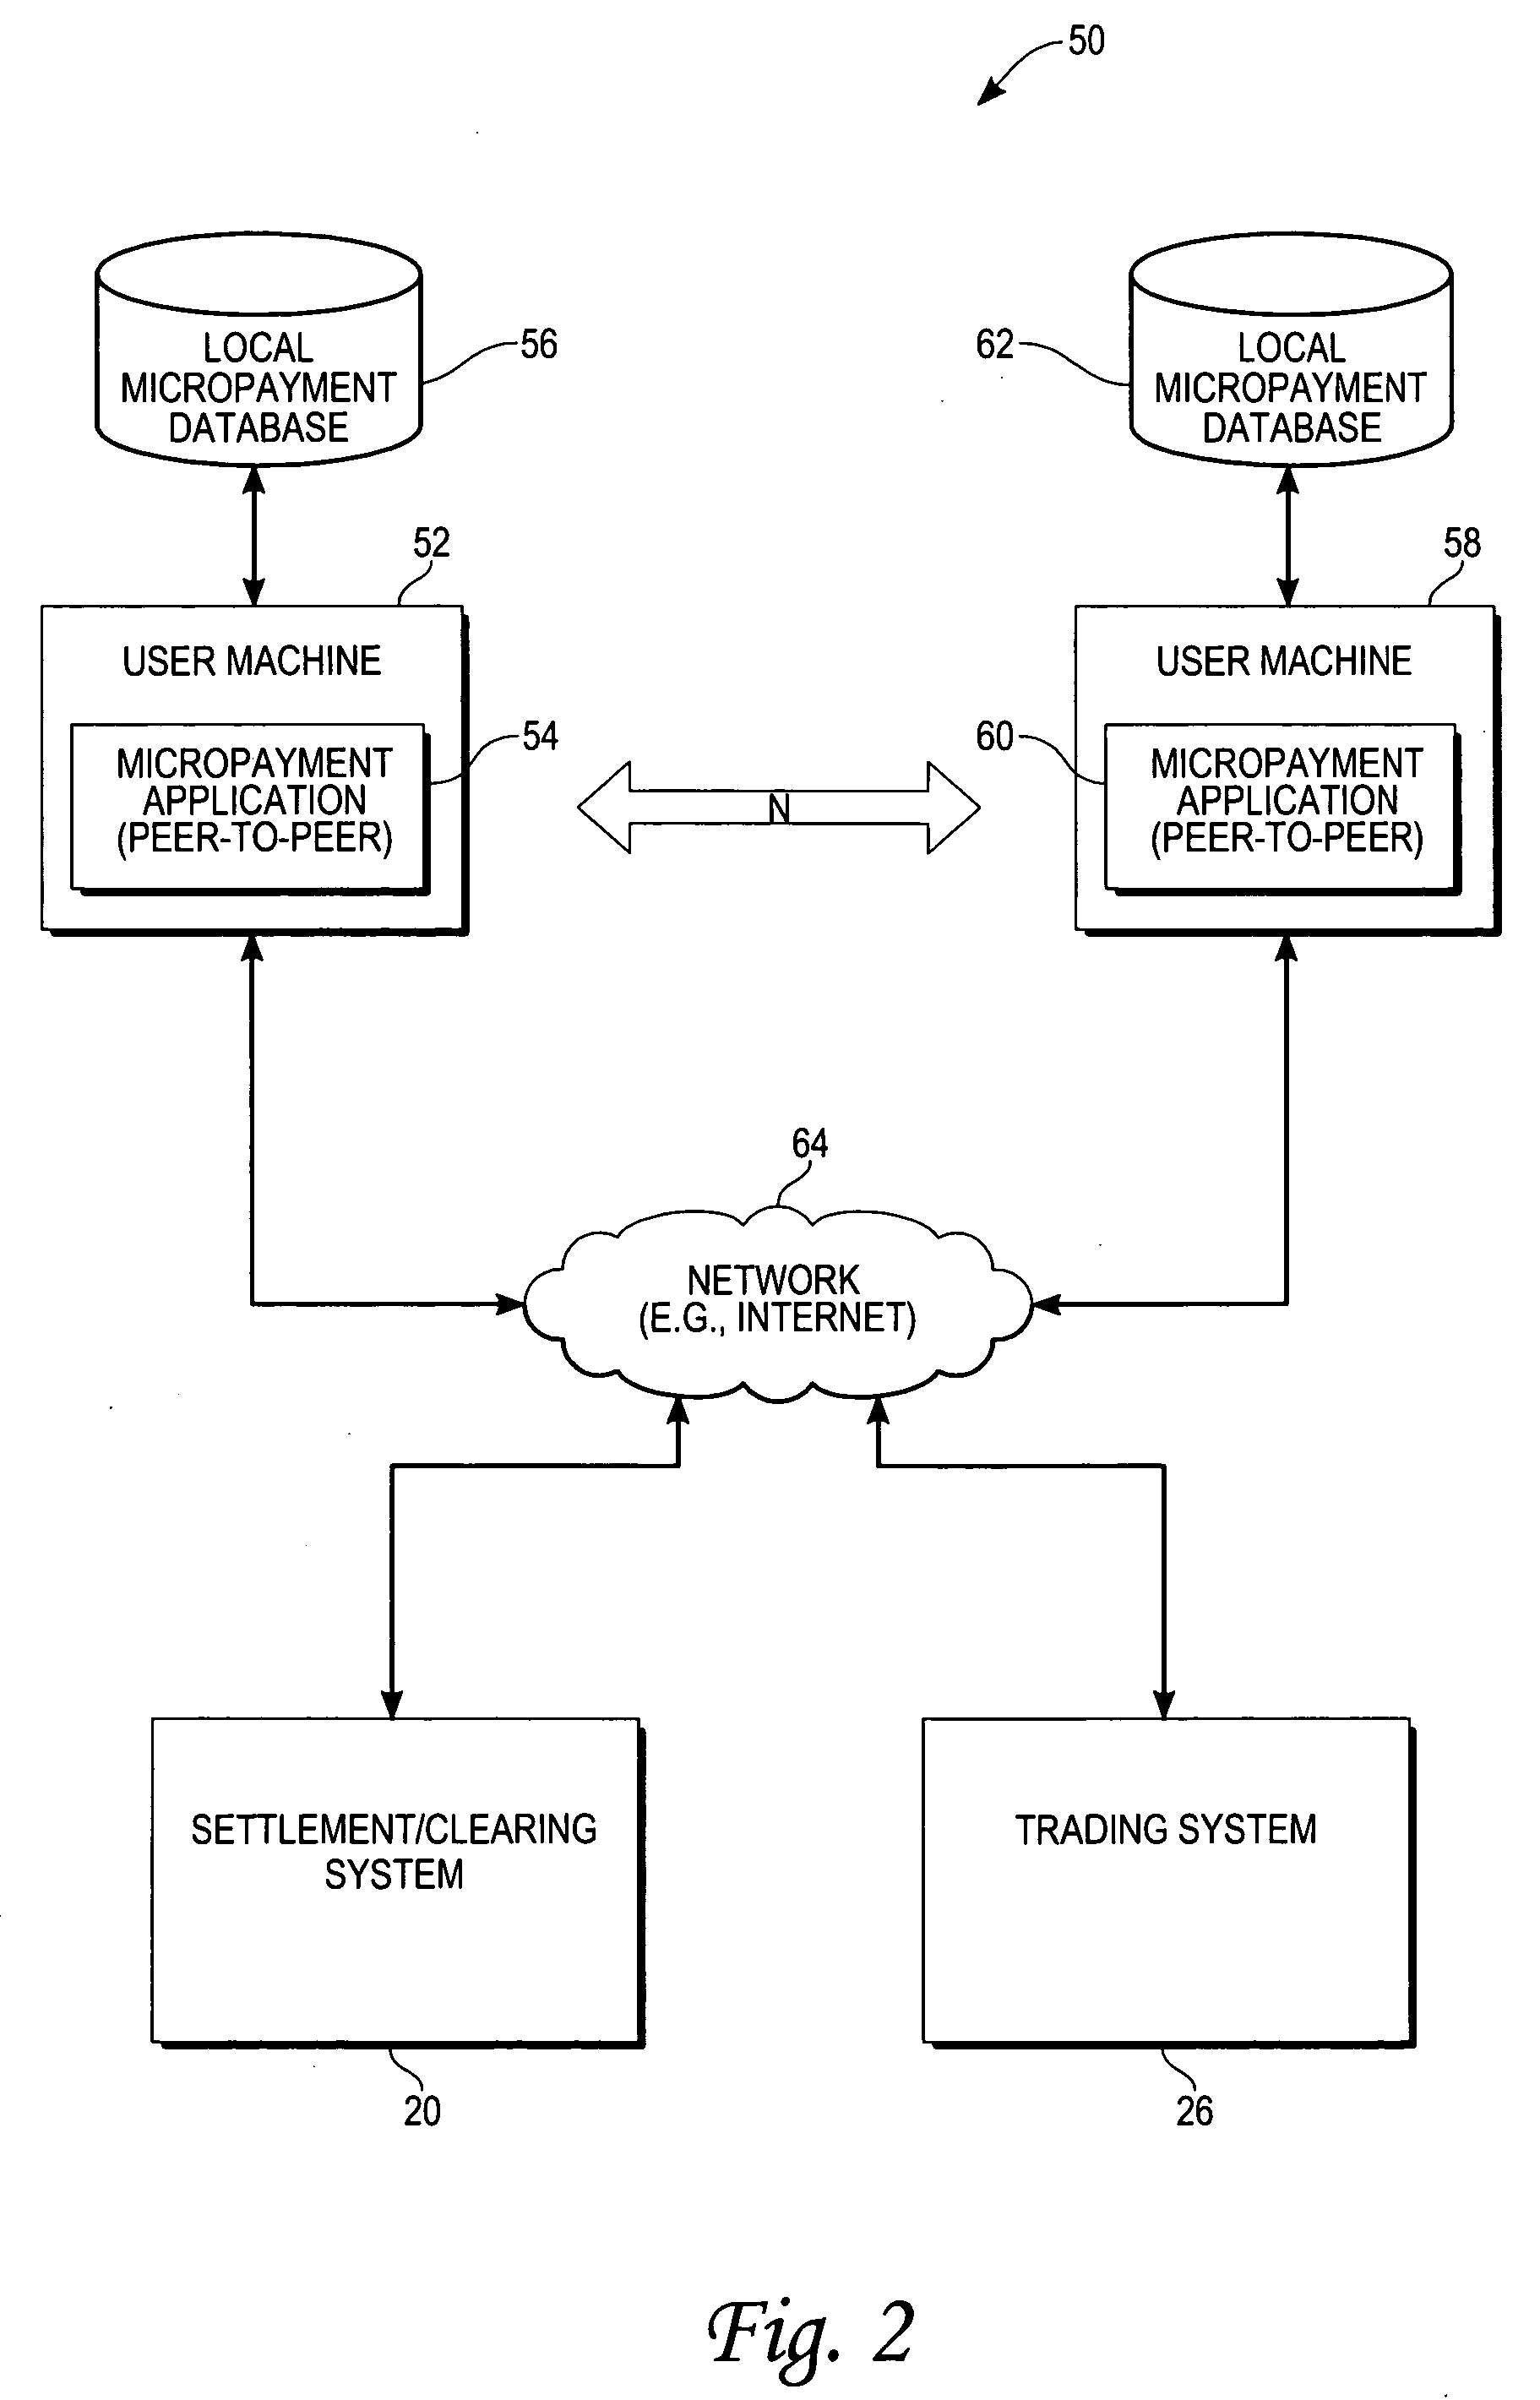 Method and system to facilitate a payment in satisfaction of accumulated micropayment commitments to a vendor